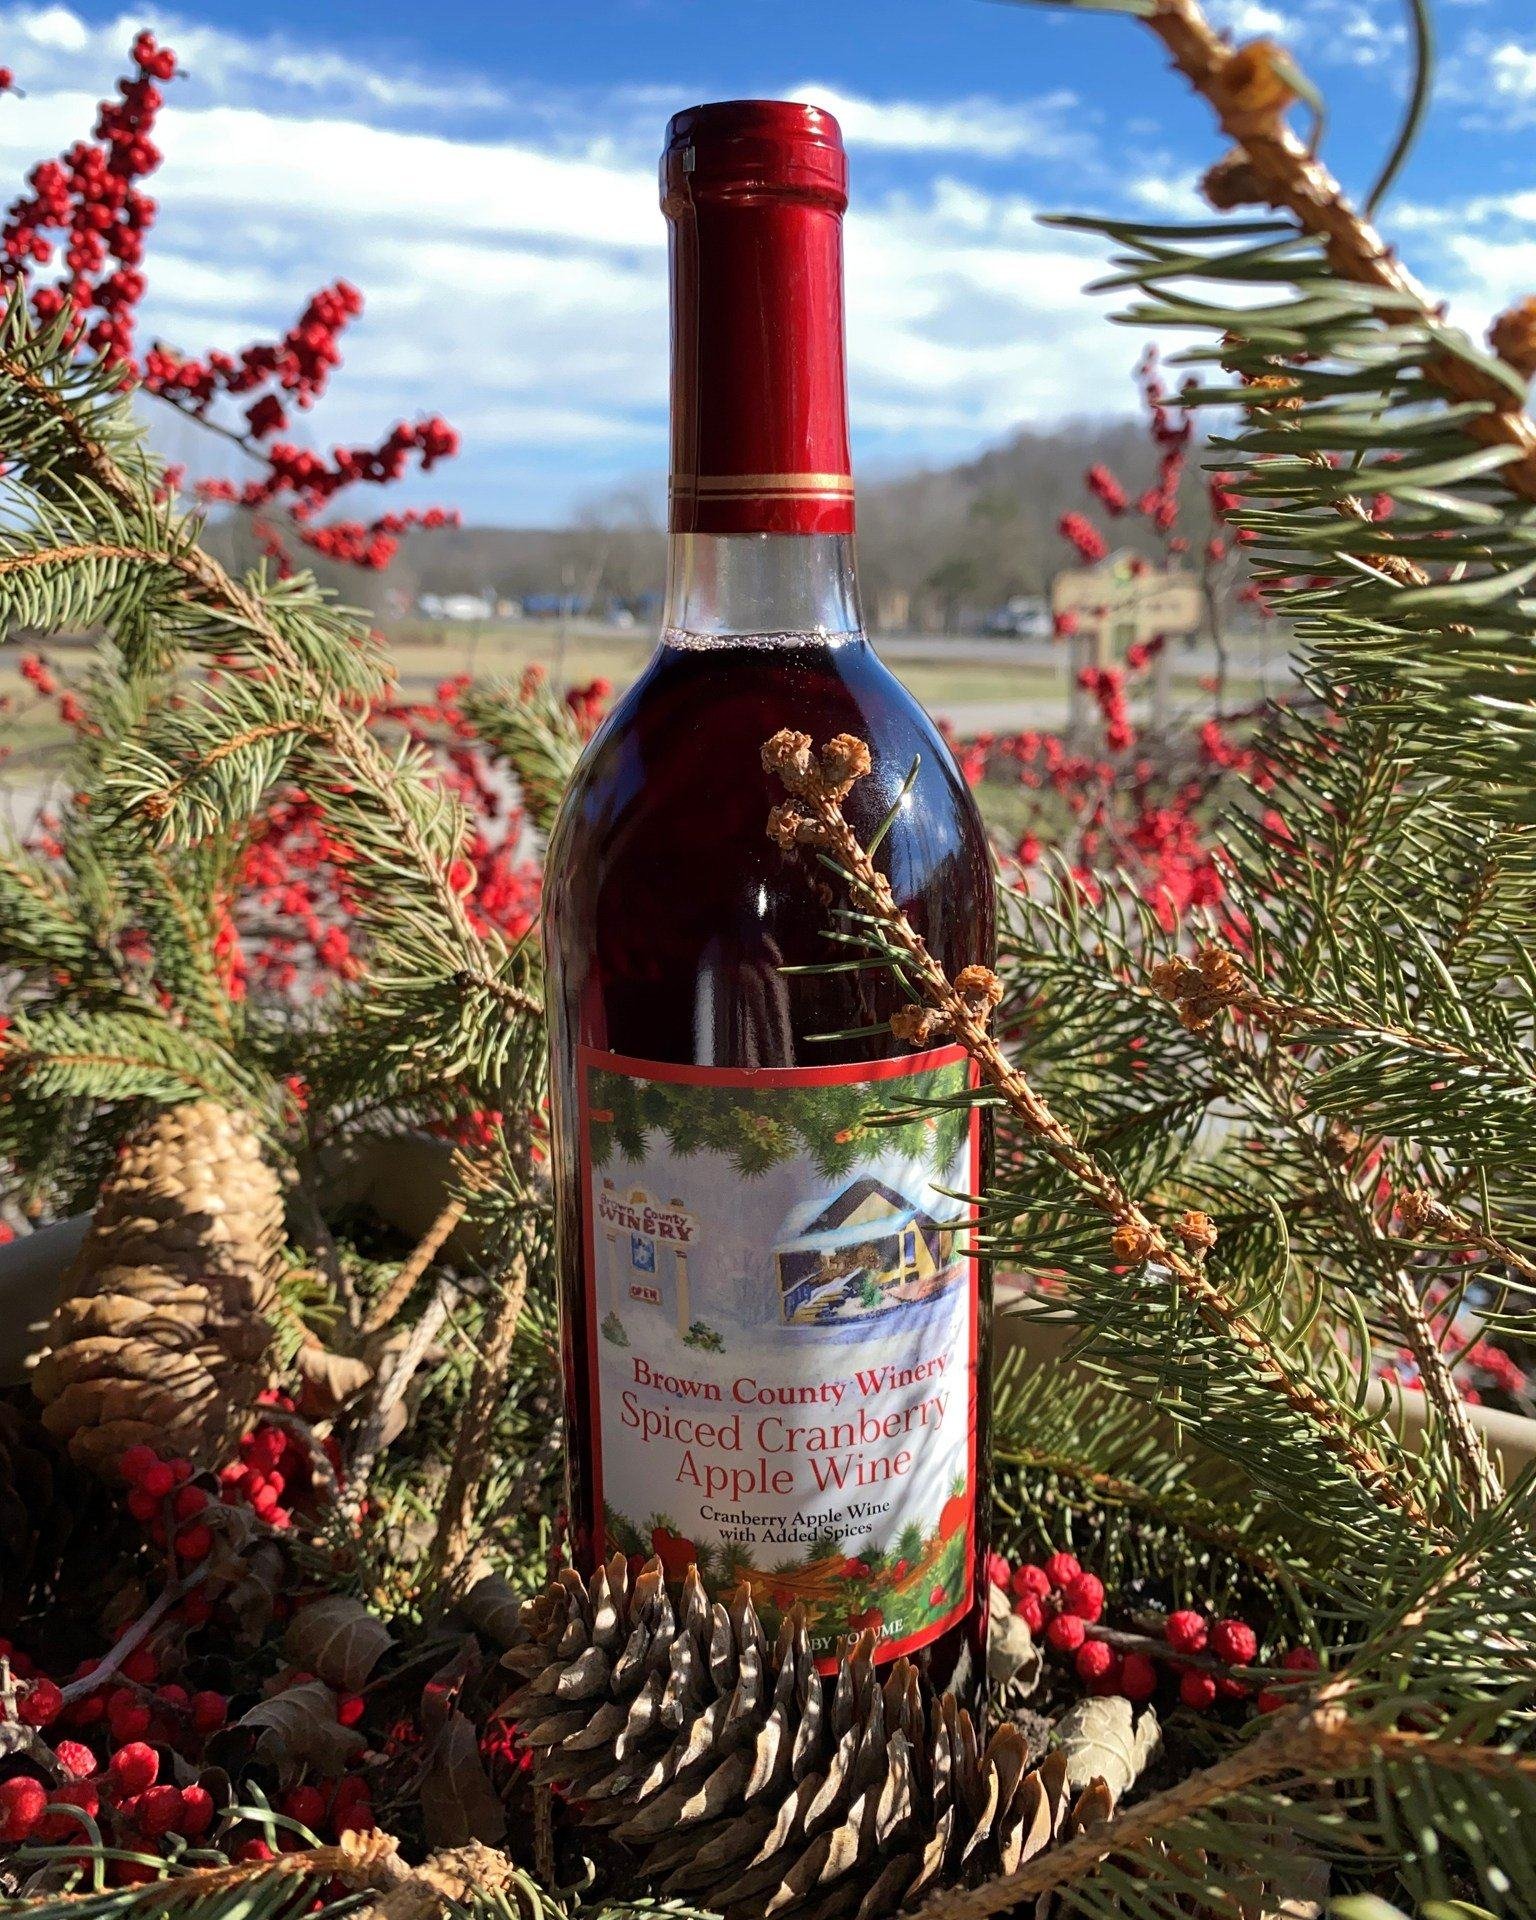 We are running dangerously low on Spiced Cranberry Apple Wine!! 😱

Now on sale for $9.50 a bottle, make sure to come see us soon to grab some while you can!  Try this wine room temp or chilled if you don't want to warm it up.

If you cant make it to